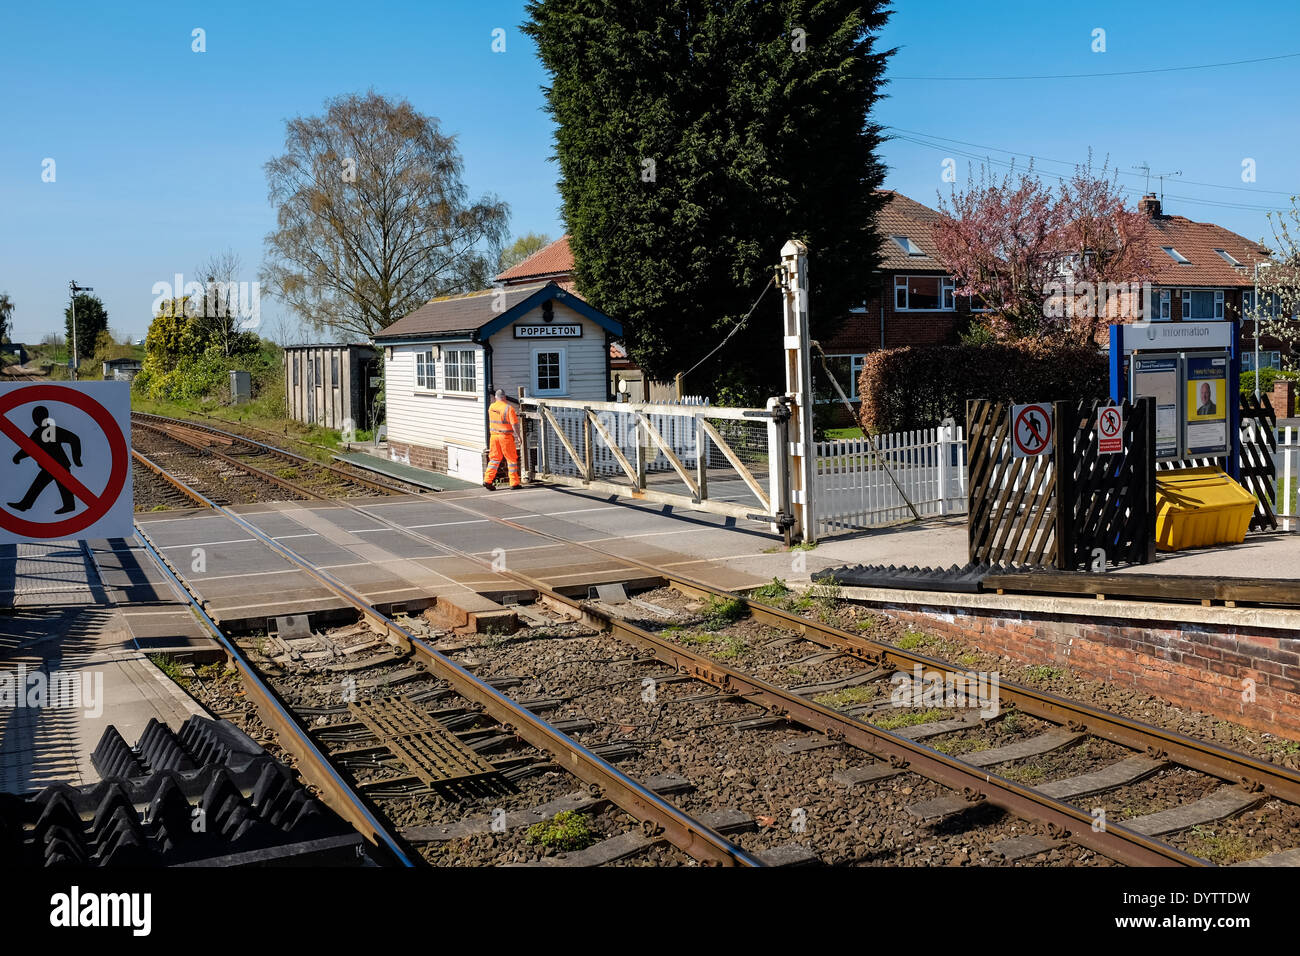 Poppleton station master securing a level crossing gate before a train arrives at the station on a sunny day. Stock Photo